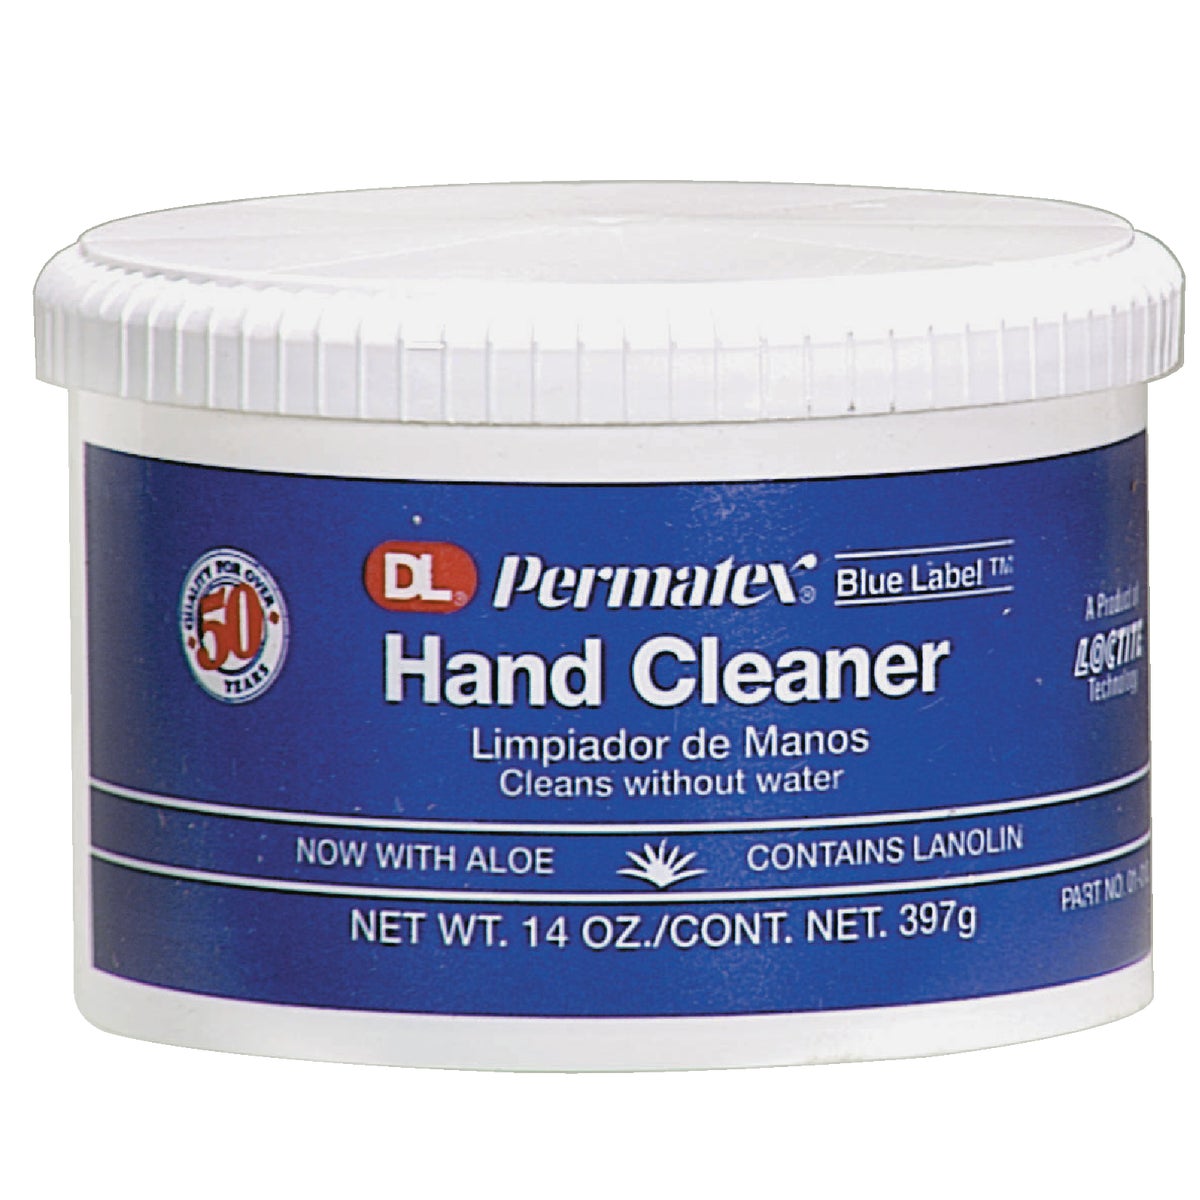 PERMATEX Smooth 14 Oz. Hand Cleaner